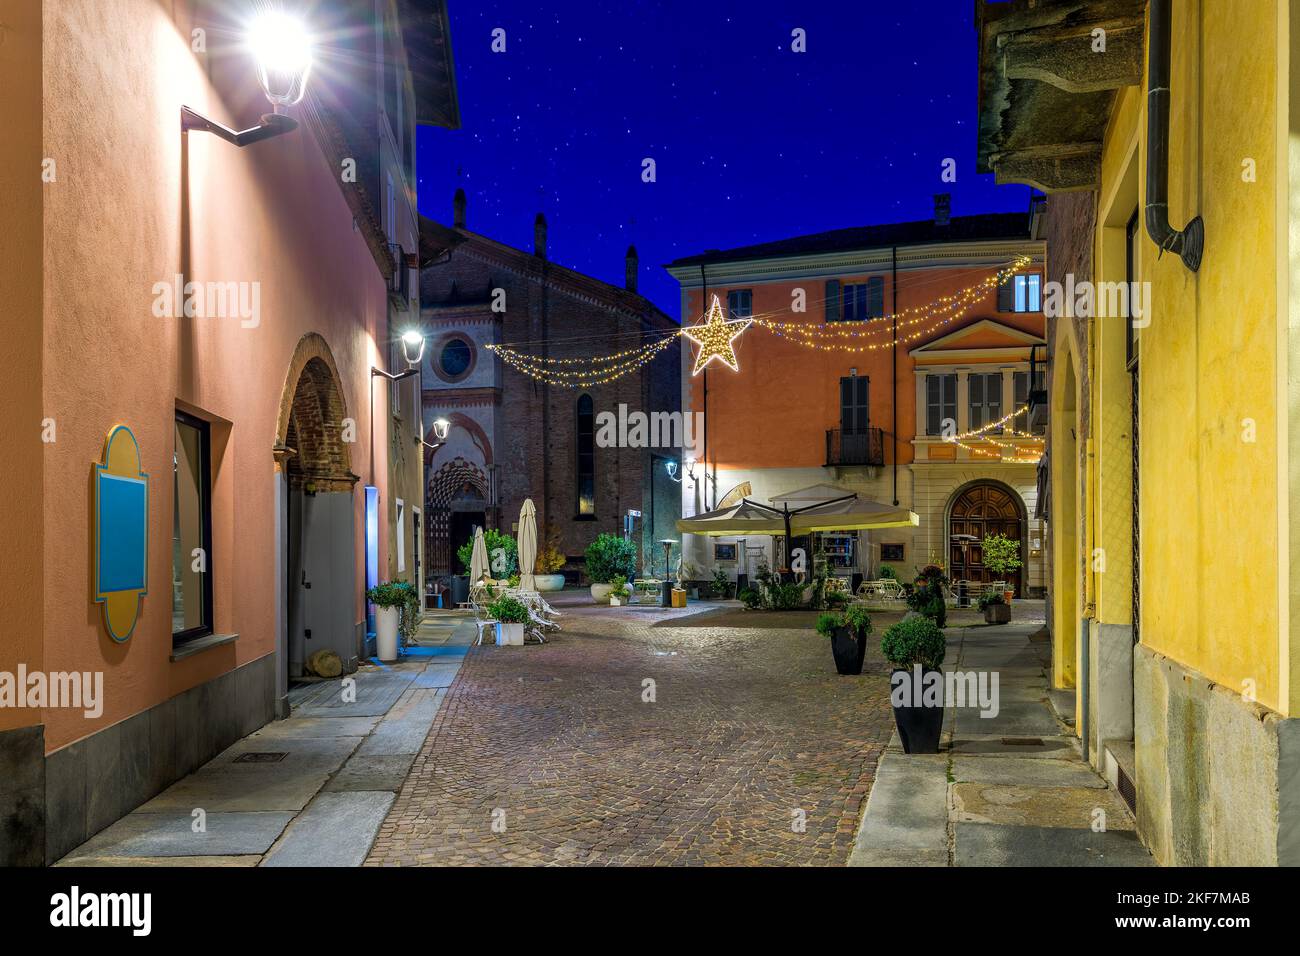 View of narrow cobblestone street among old buildings and Christmas illumination in the evening in Alba, Piedmont, Northern Italy. Stock Photo